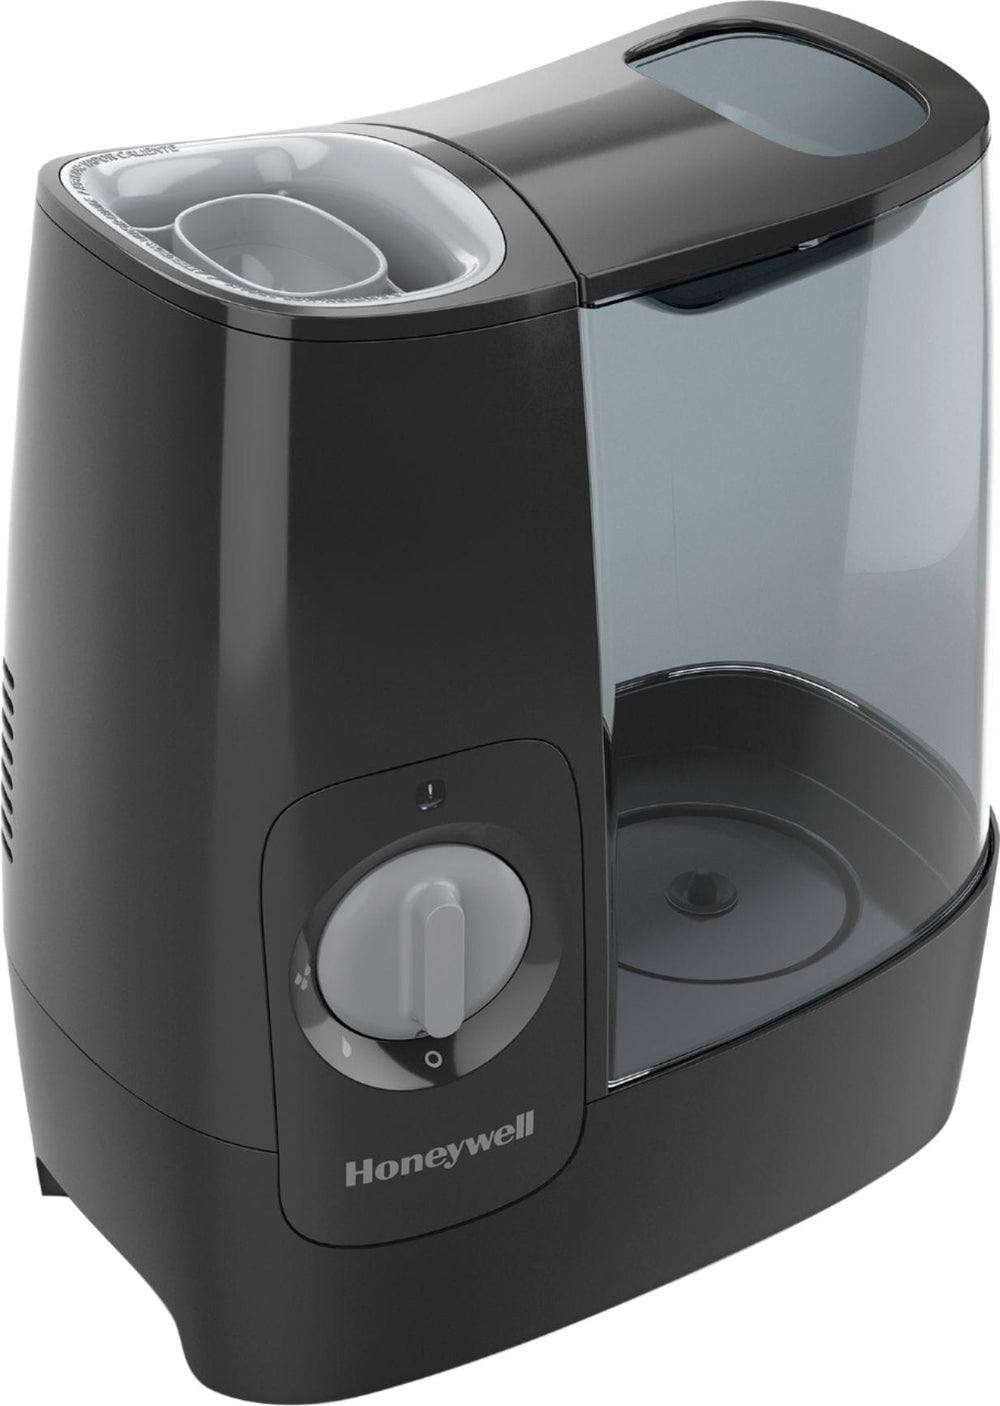 Honeywell HWM845 Warm Mist Humidifier with Essential oil cup, Filter Free - Black_1